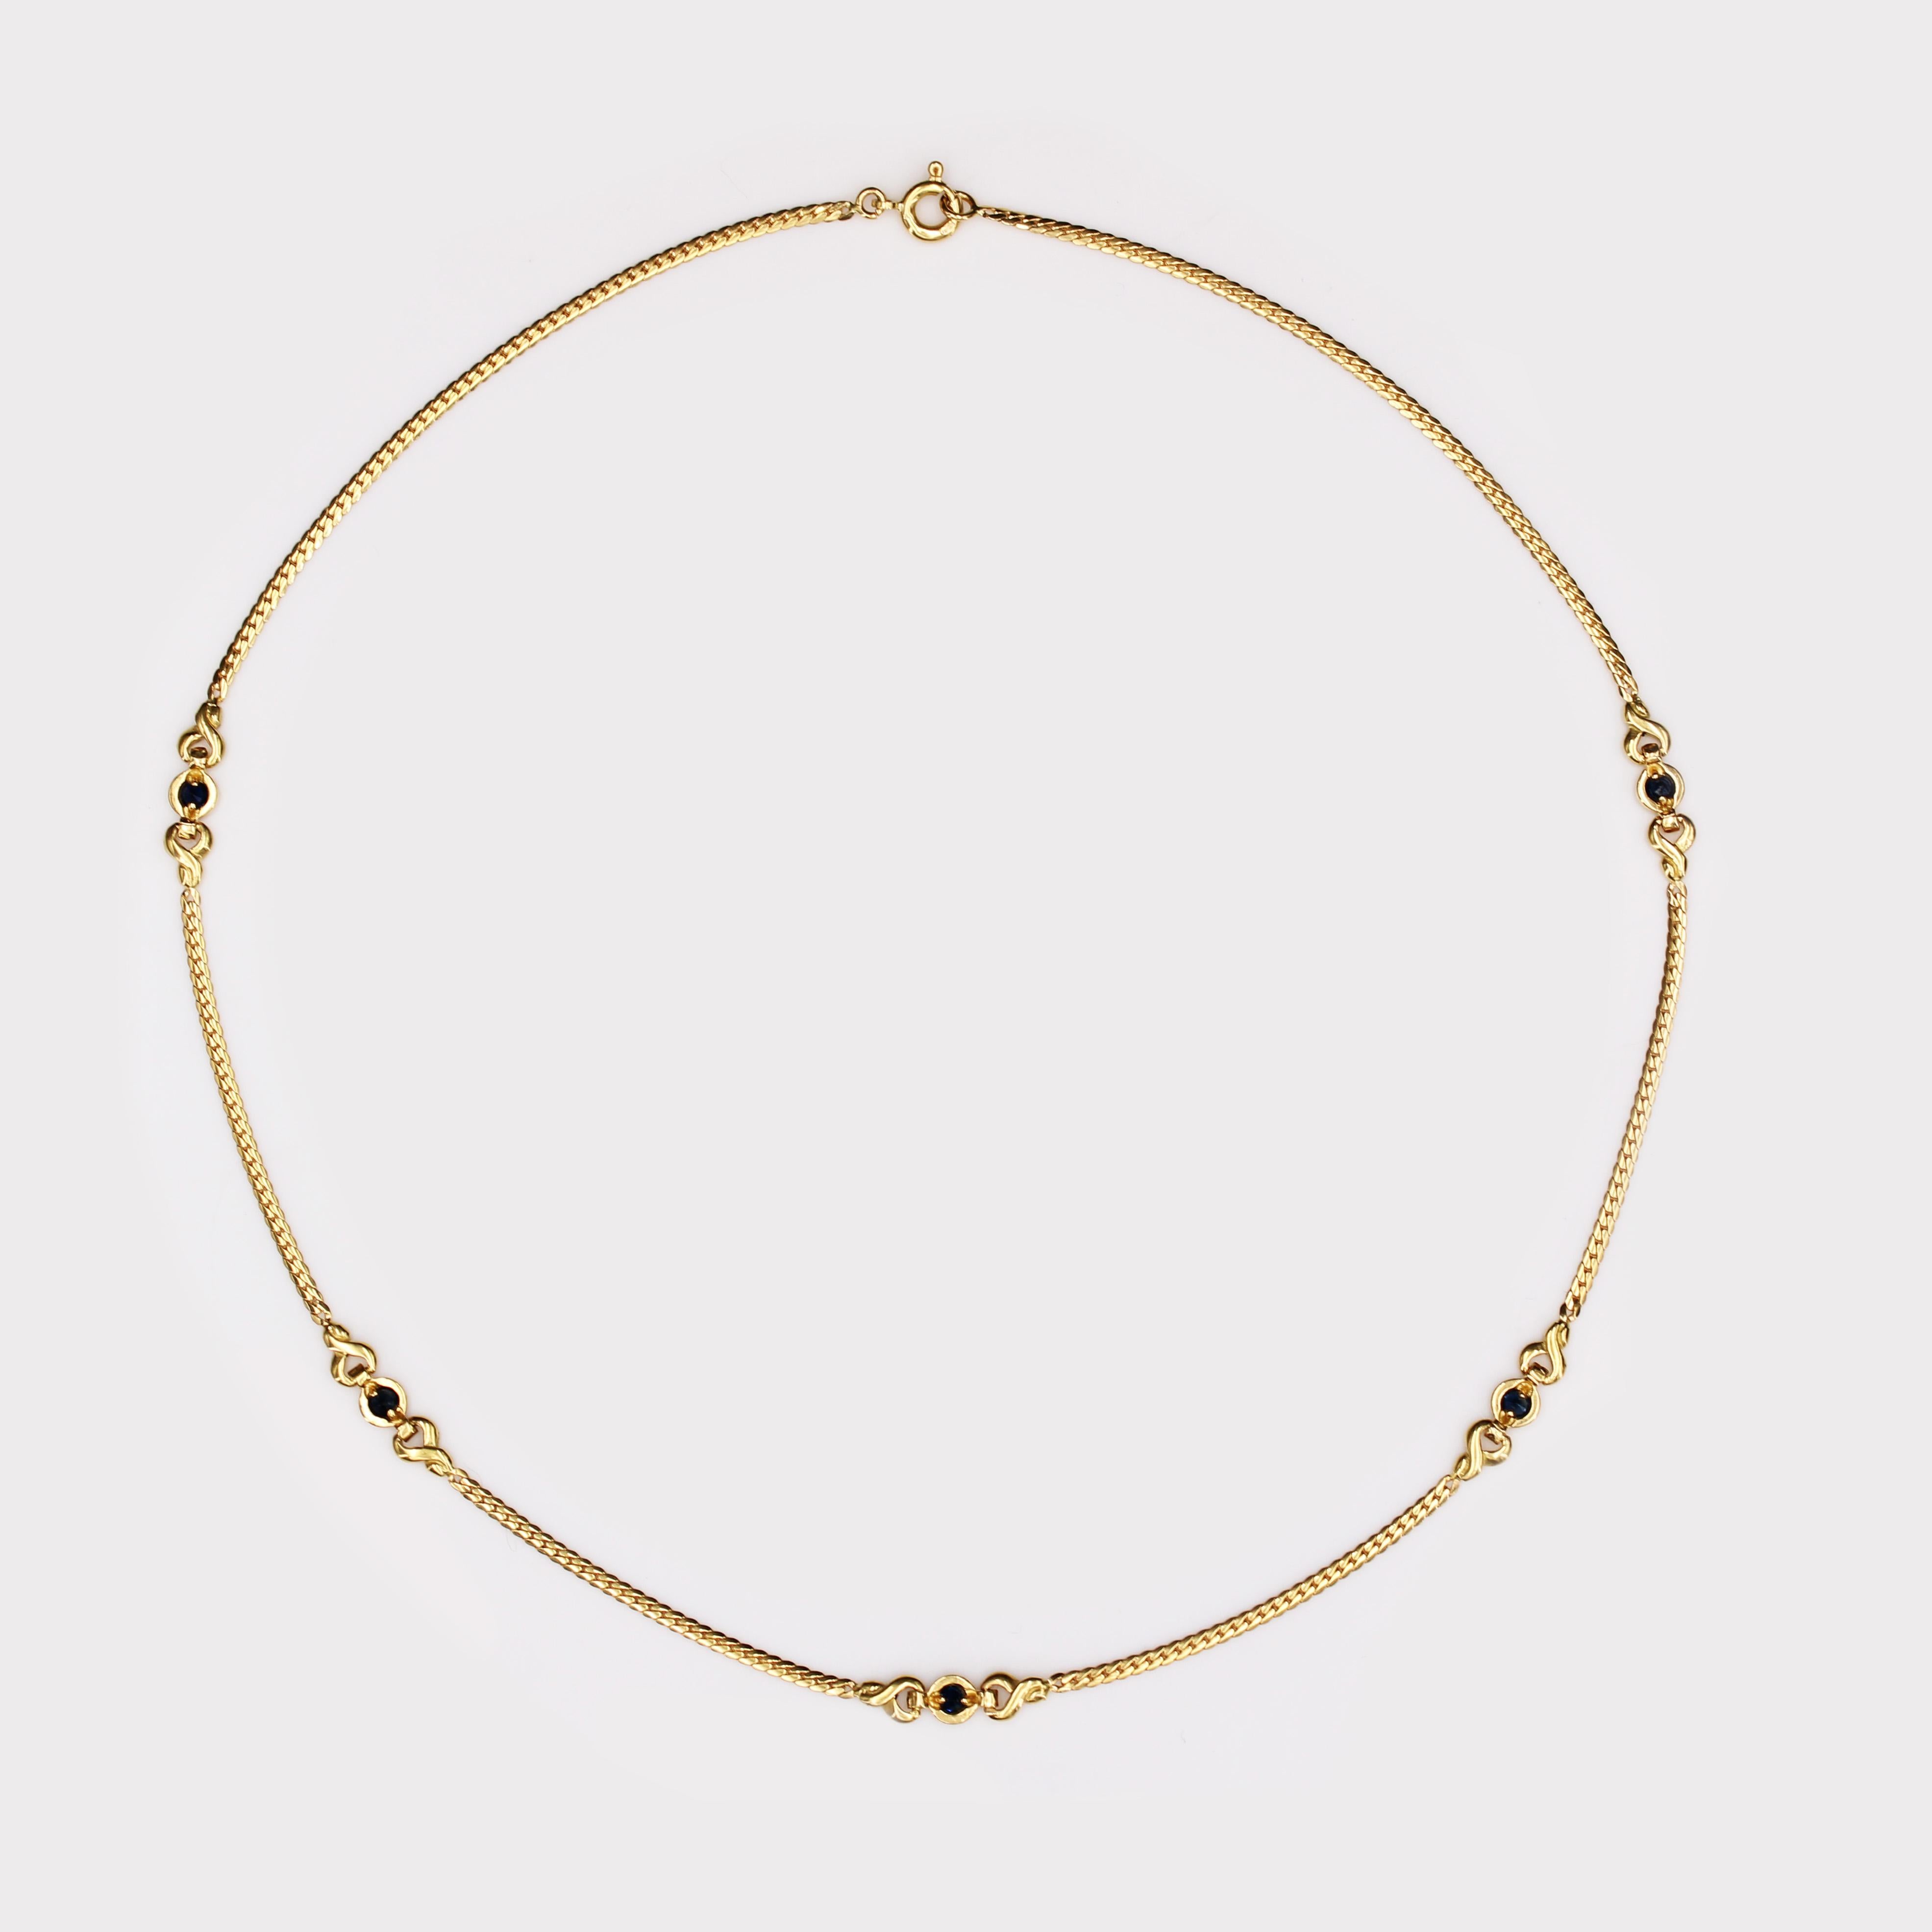 Retro 1980s Sapphires 18 Karat Yellow Gold Curb Chain Choker Necklace For Sale